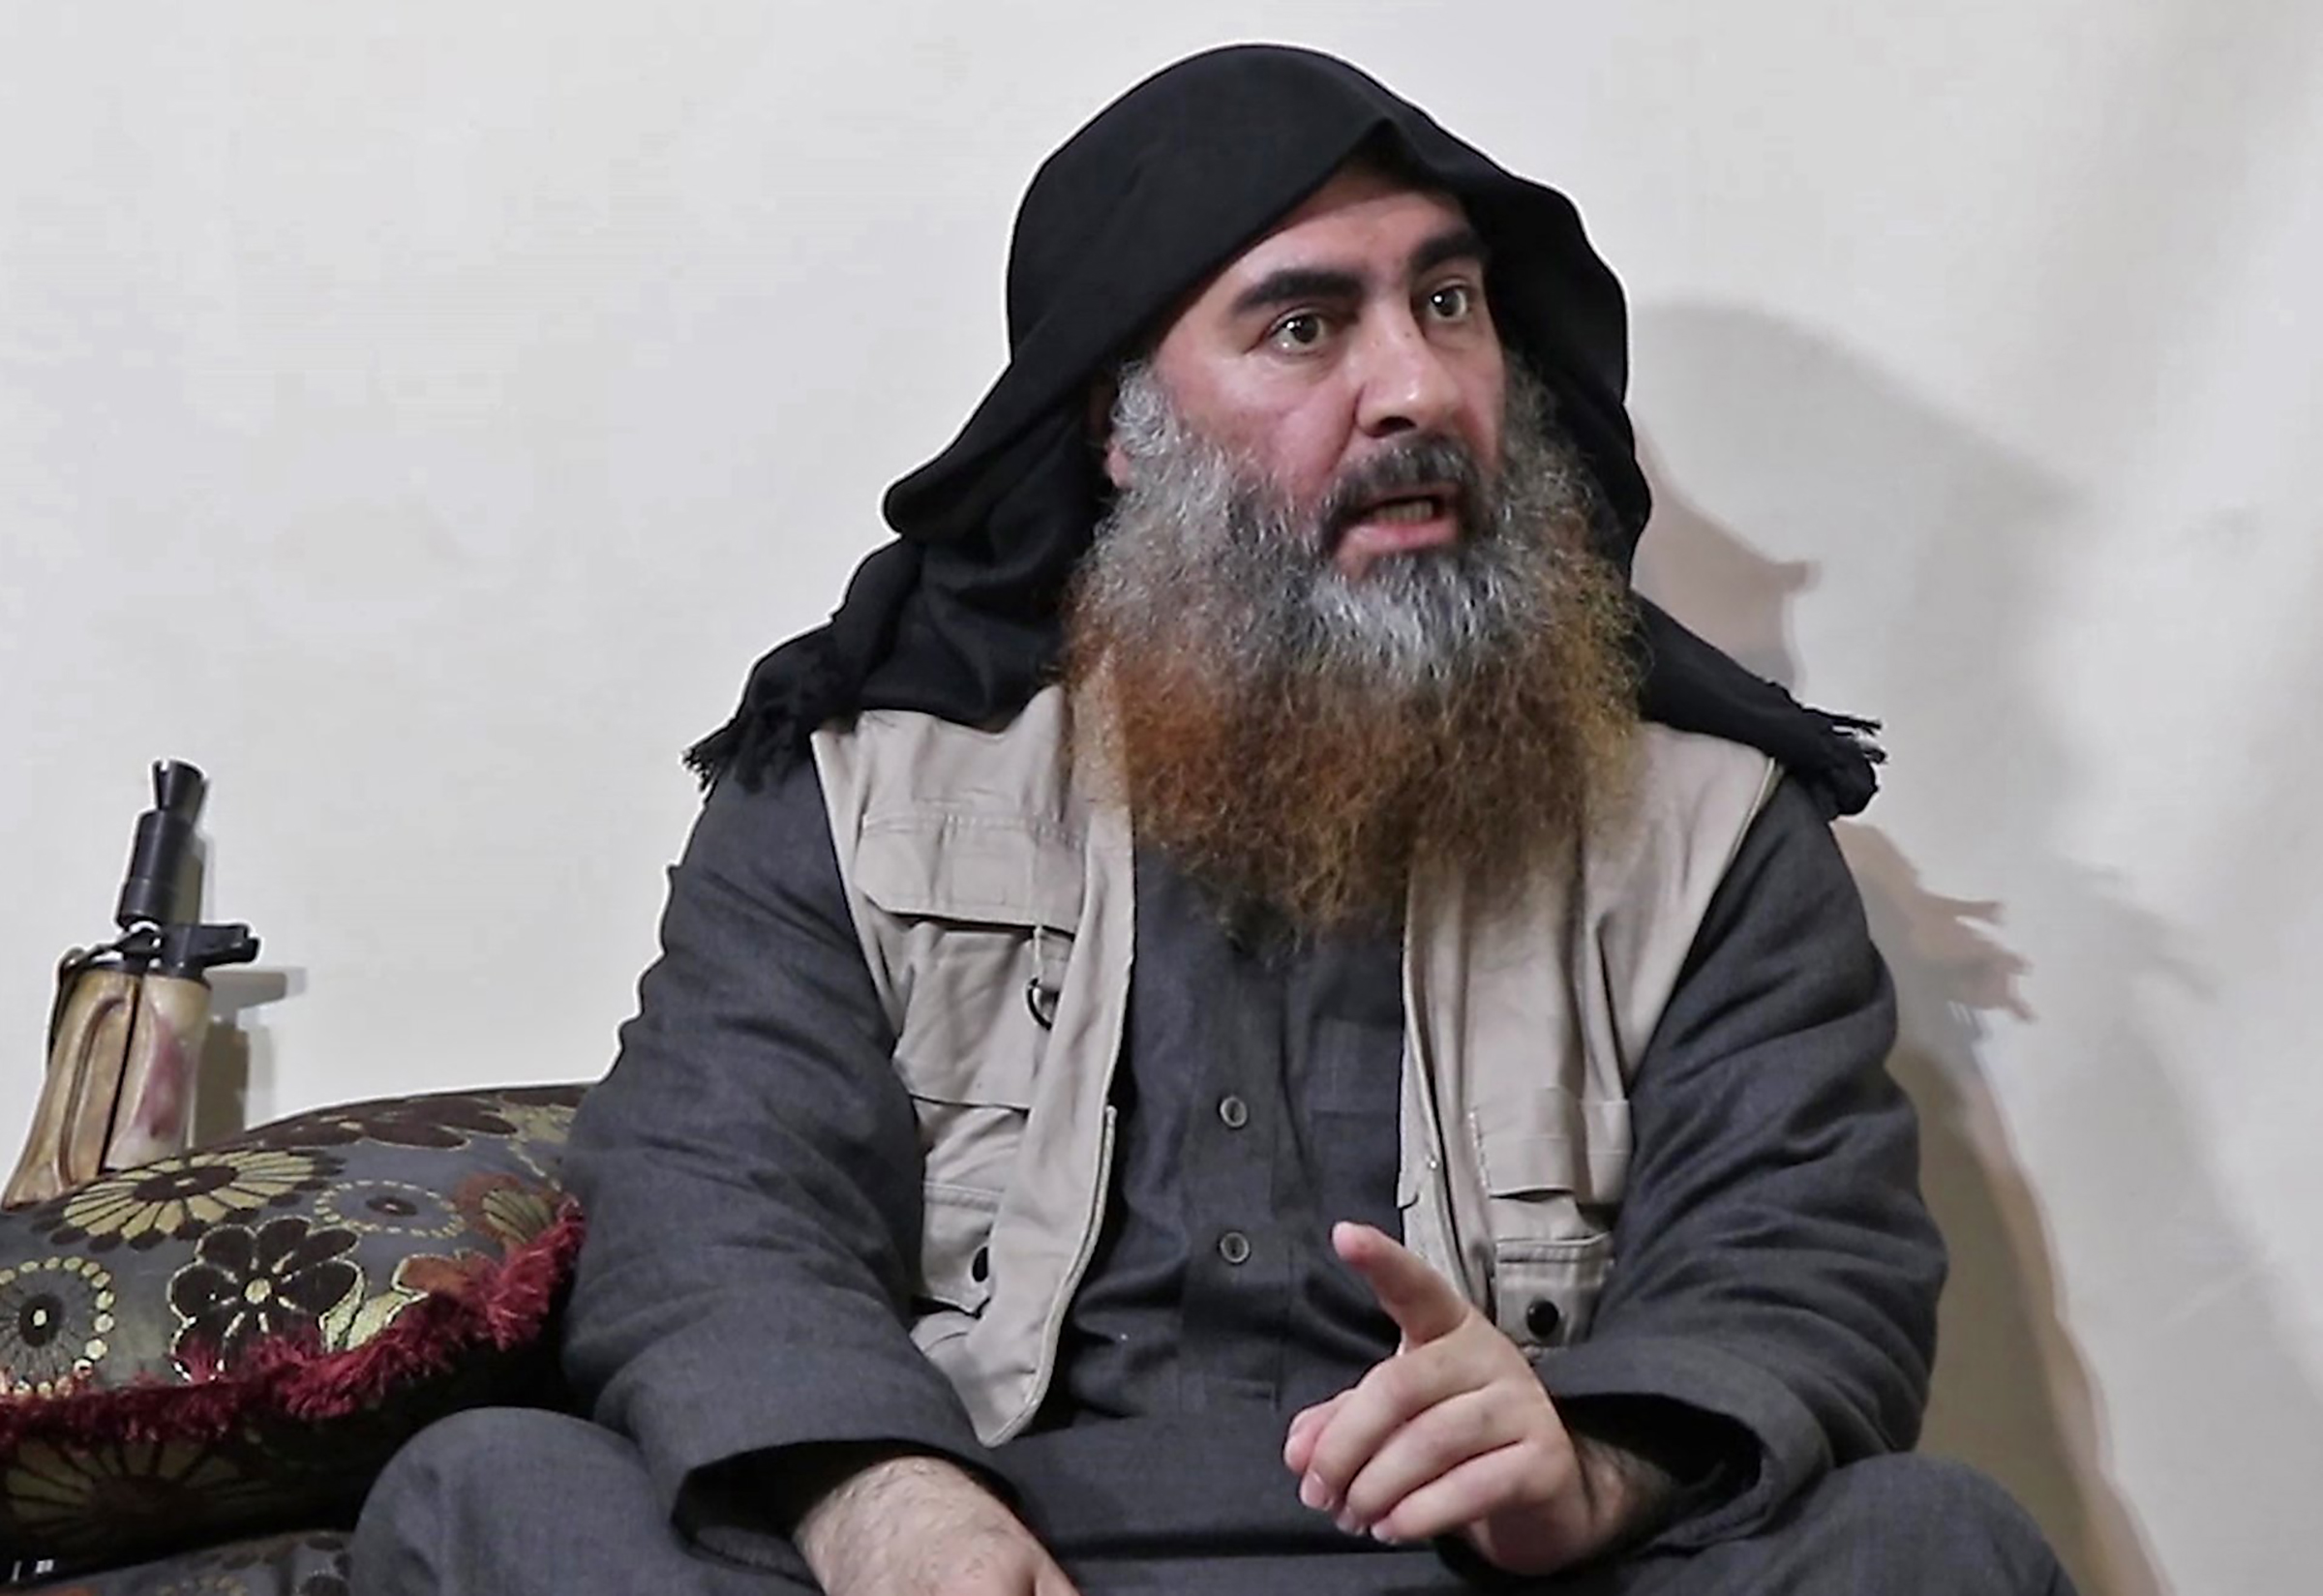 A video released by Al-Furqan media on April 29, 2019, purportedly shows ISIS leader Abu Bakr al-Baghdadi for the first time in five years.